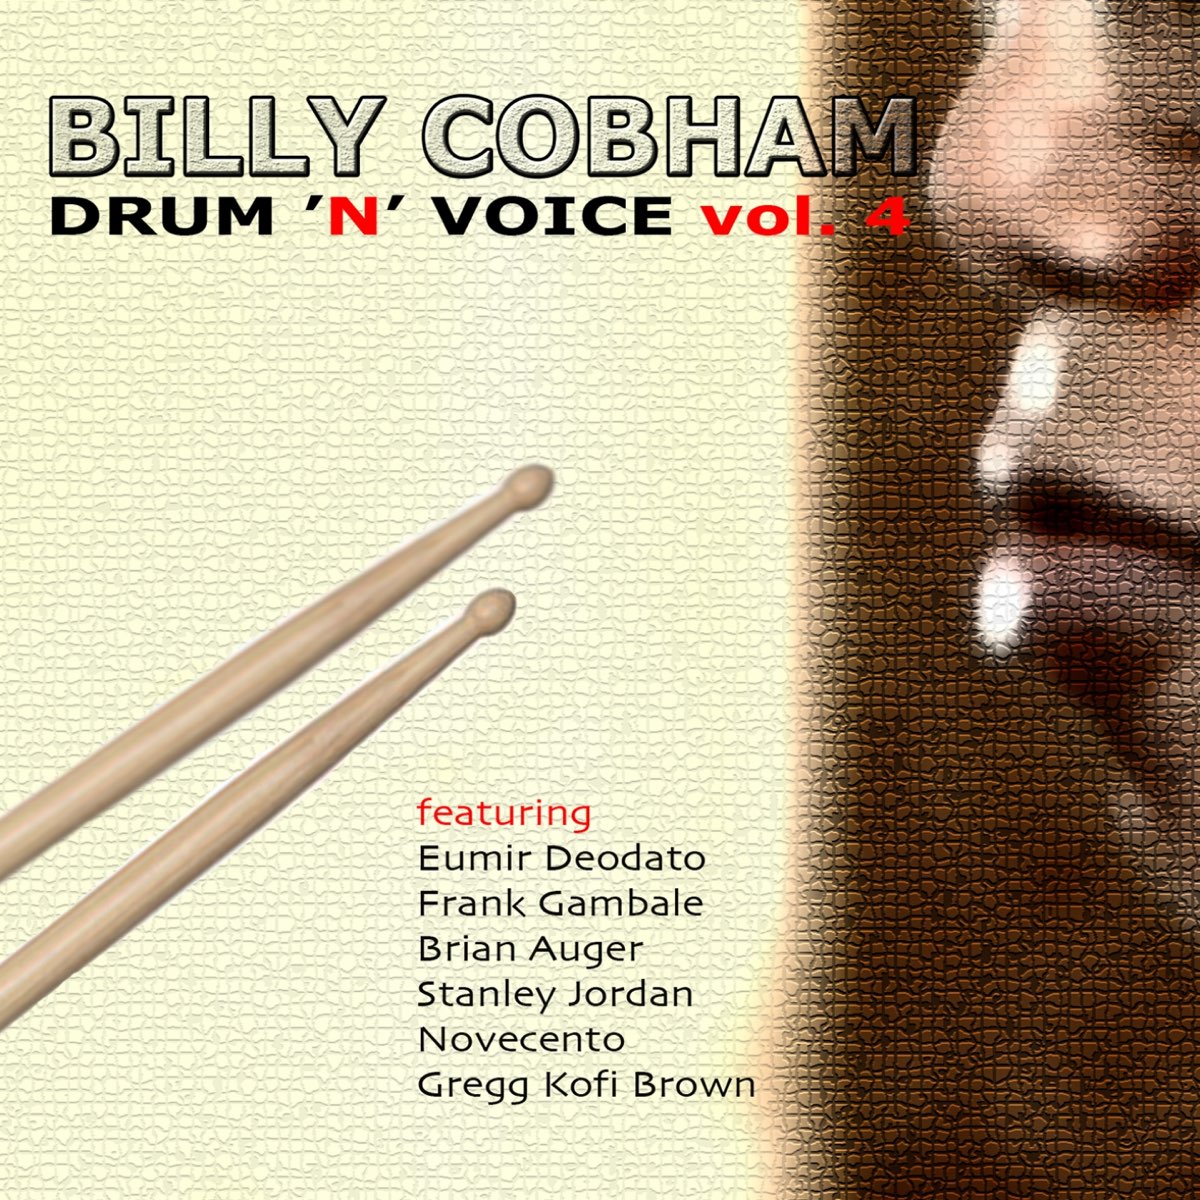 N voice. Billy Cobham 2001 Drum 'n' Voice - all that Groove. Billy Cobham - interactive (ft. Novecento & Brian Auger) -. Billy Cobham 1975. Billy Cobham young.